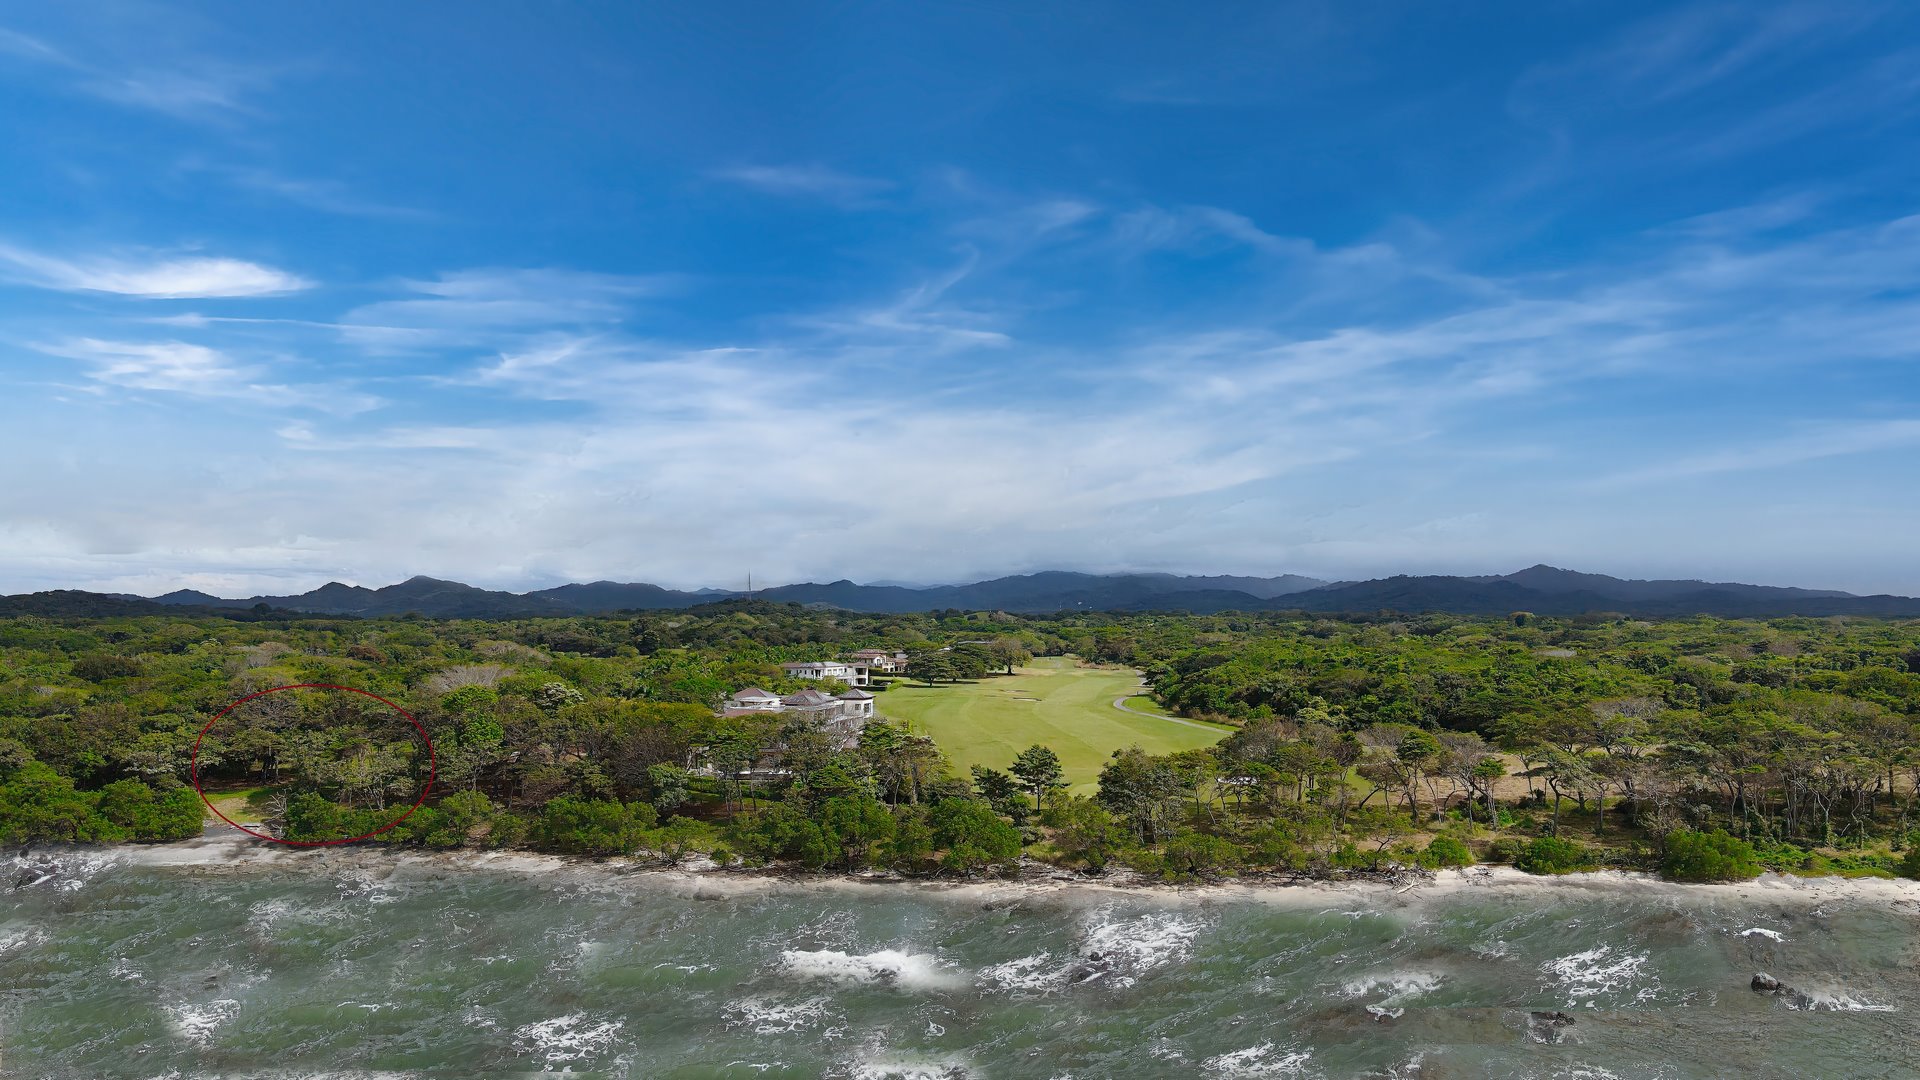 10316-The superb location of the beachfront lots for sale in Costa Rica with private access to the beach